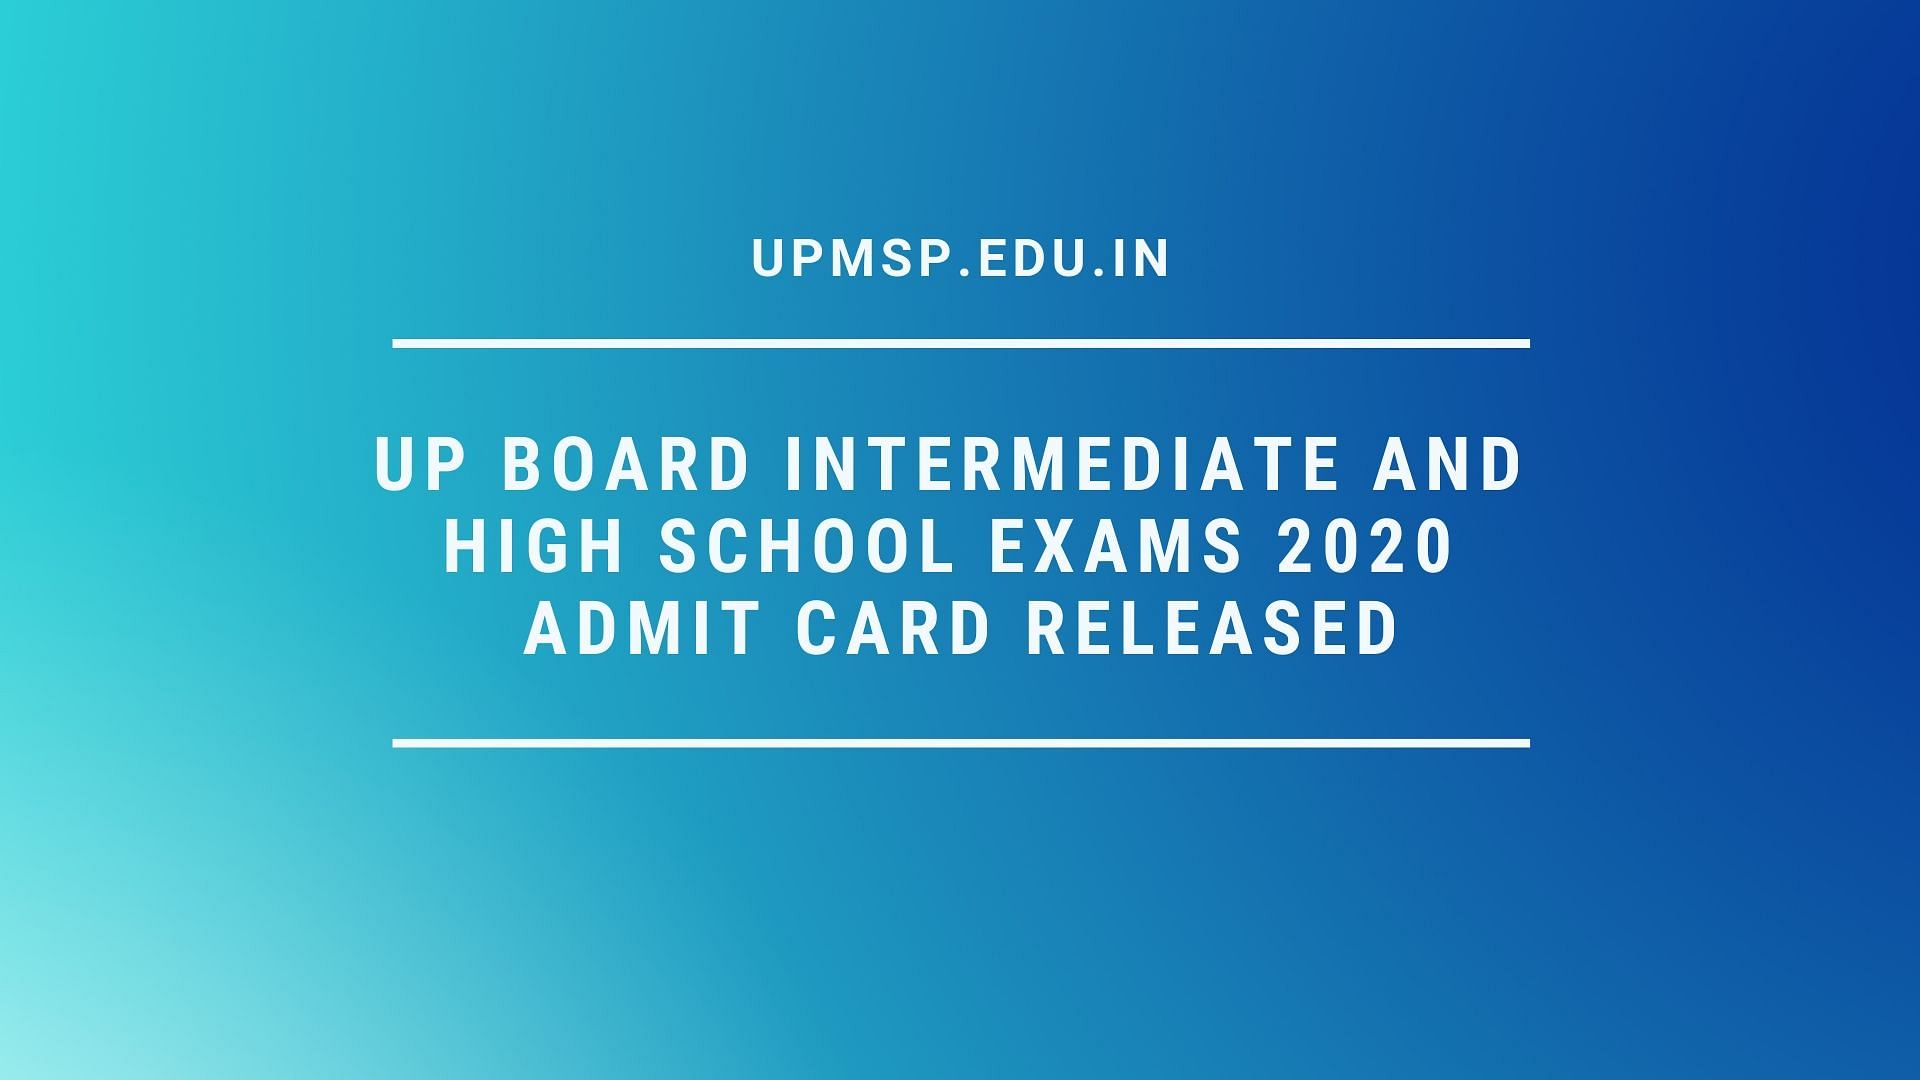 UP Board Class 10 and Class 12 admit cards released.